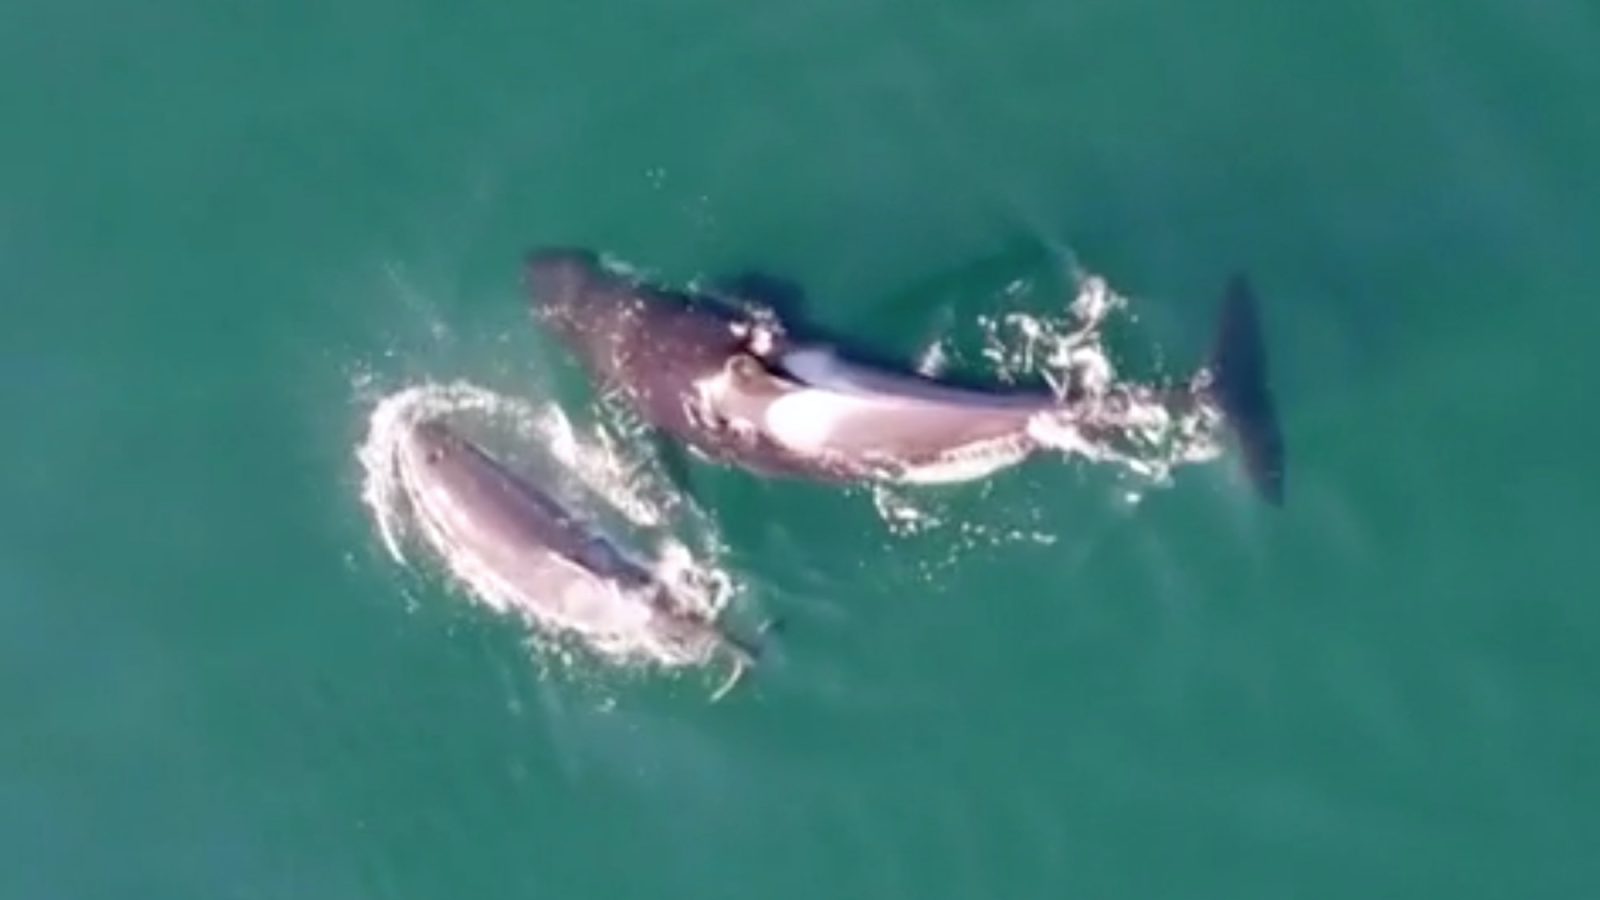 Drone footage helps scientists study killer whale behavior